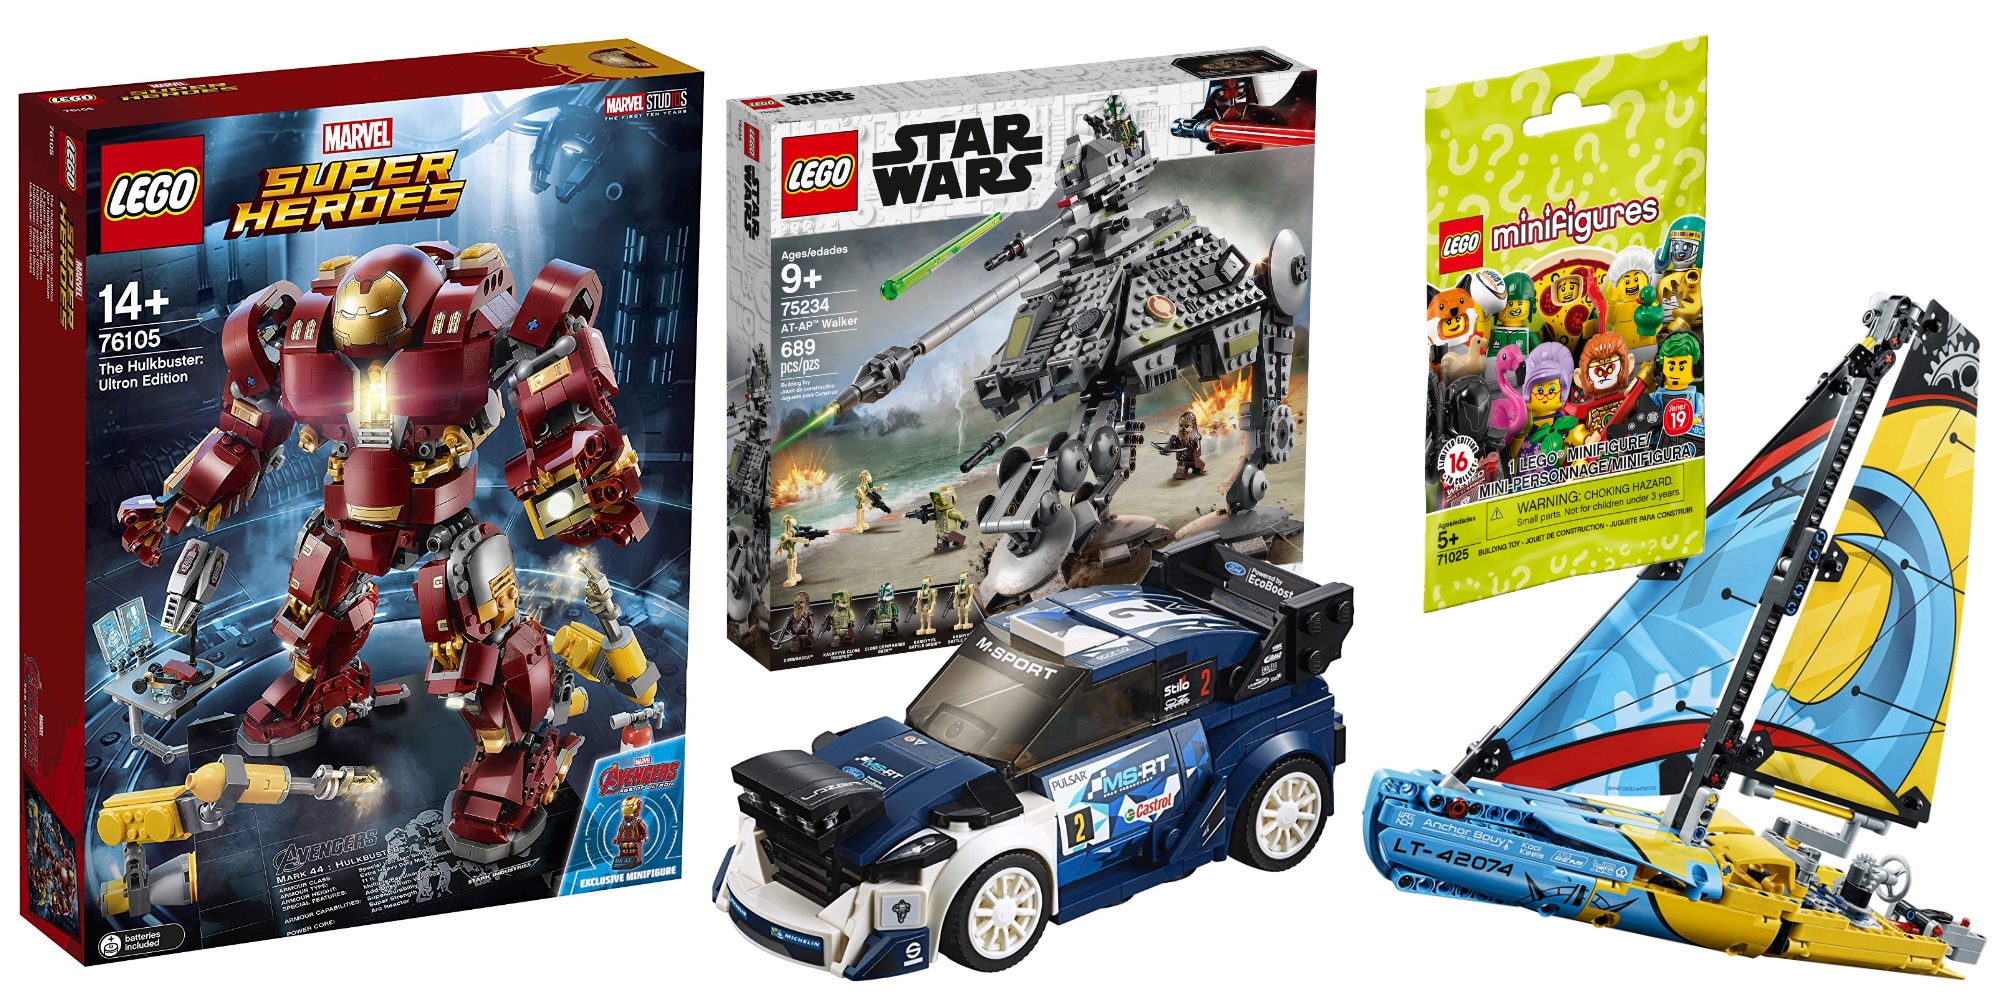 LEGO Cyber Monday deals: Star Wars, Technic, more from $6 - 9to5Toys